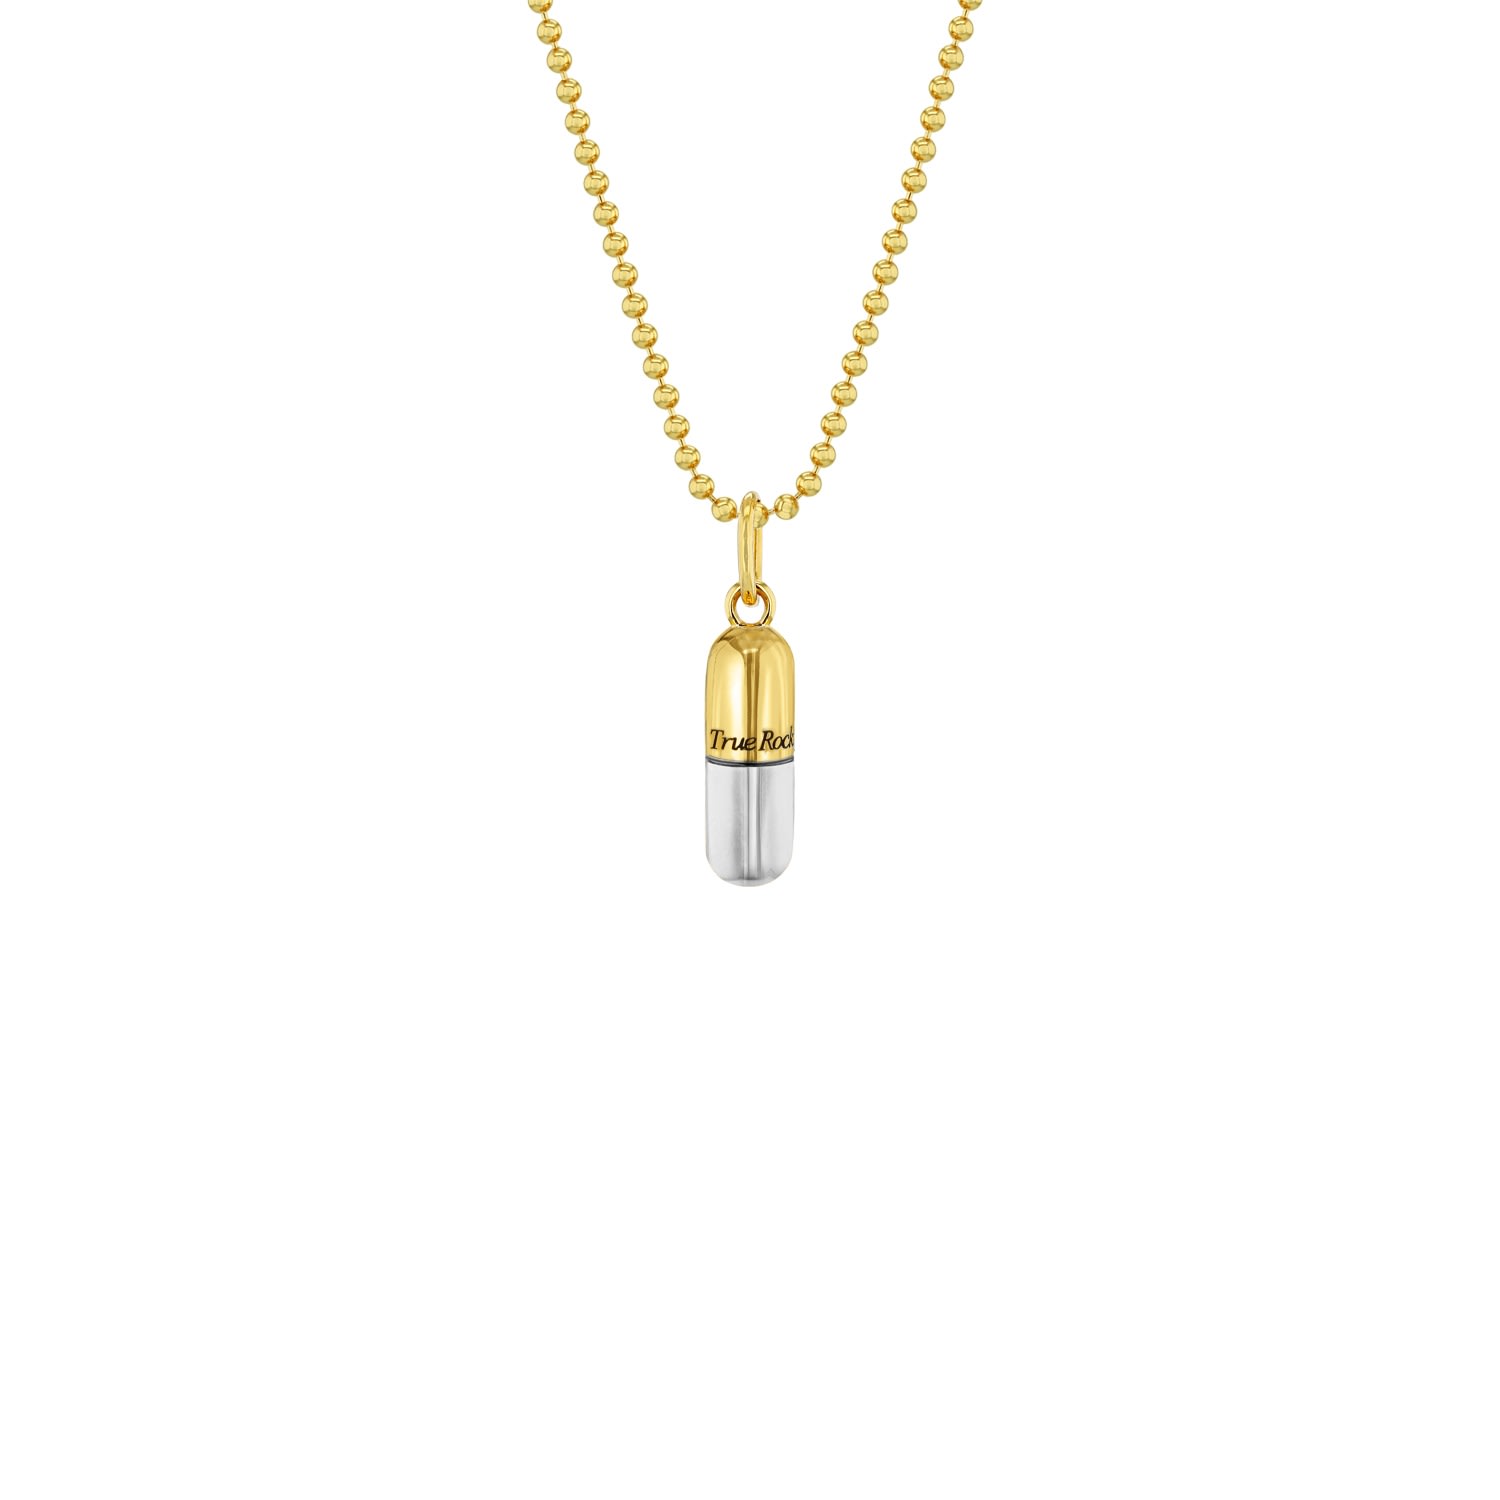 Men's Silver / Gold Smallpill Pendant 2Tone 18Kt Gold-Plated & Sterling Silver On Gold Chain True Rocks